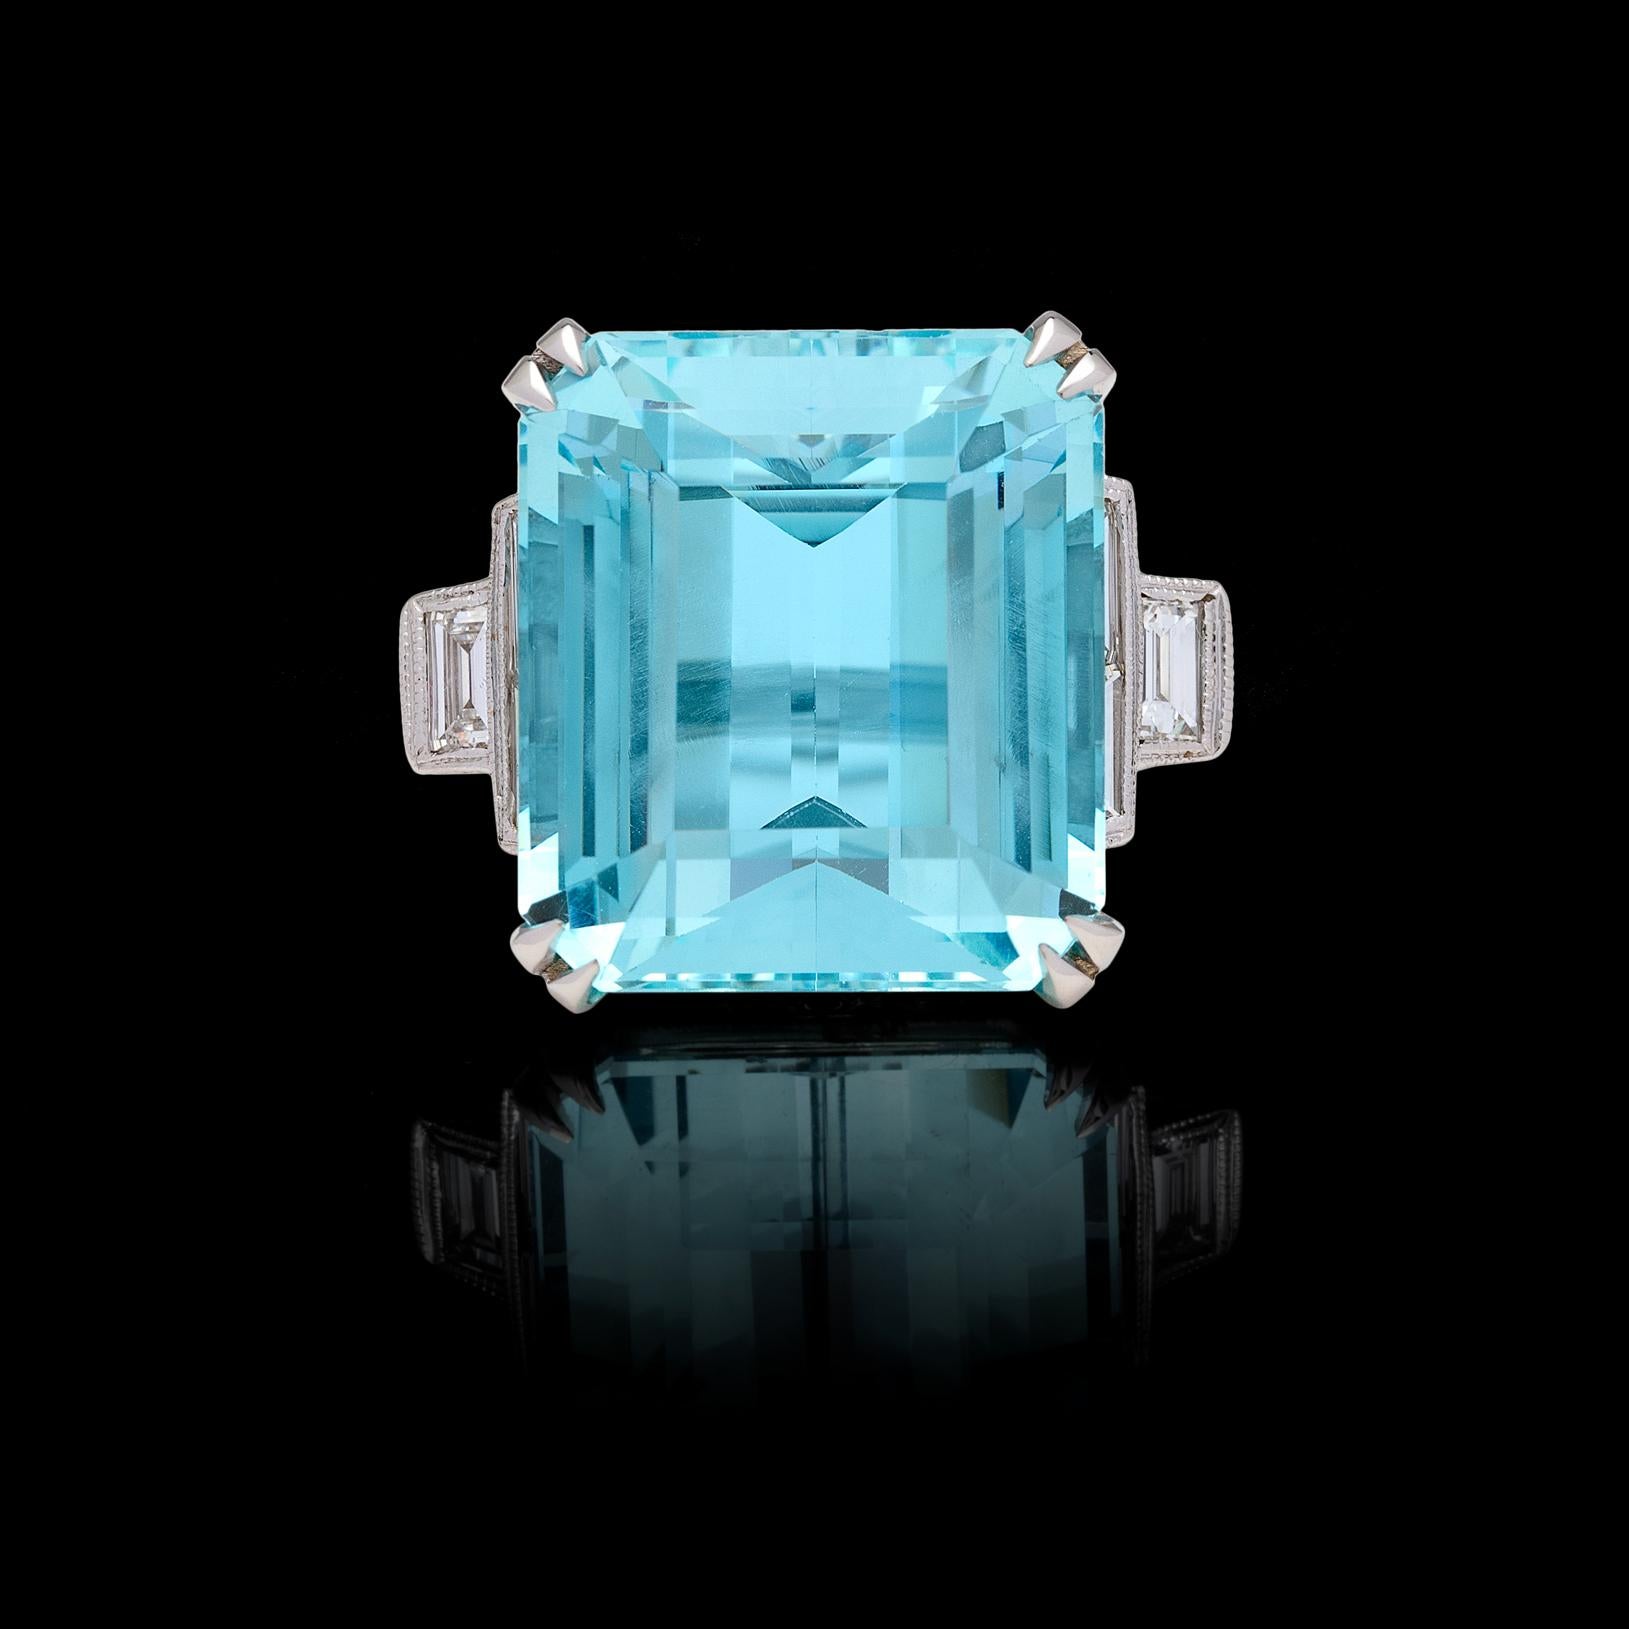 Feel like royalty! This stunning and stately 18k white gold ring features the 25.39 carats crystal blue rectangular-cut aquamarine, set in a one-of-a-kind platinum mount, with 6 baguette and 28 round brilliant-cut diamonds, weighing together an